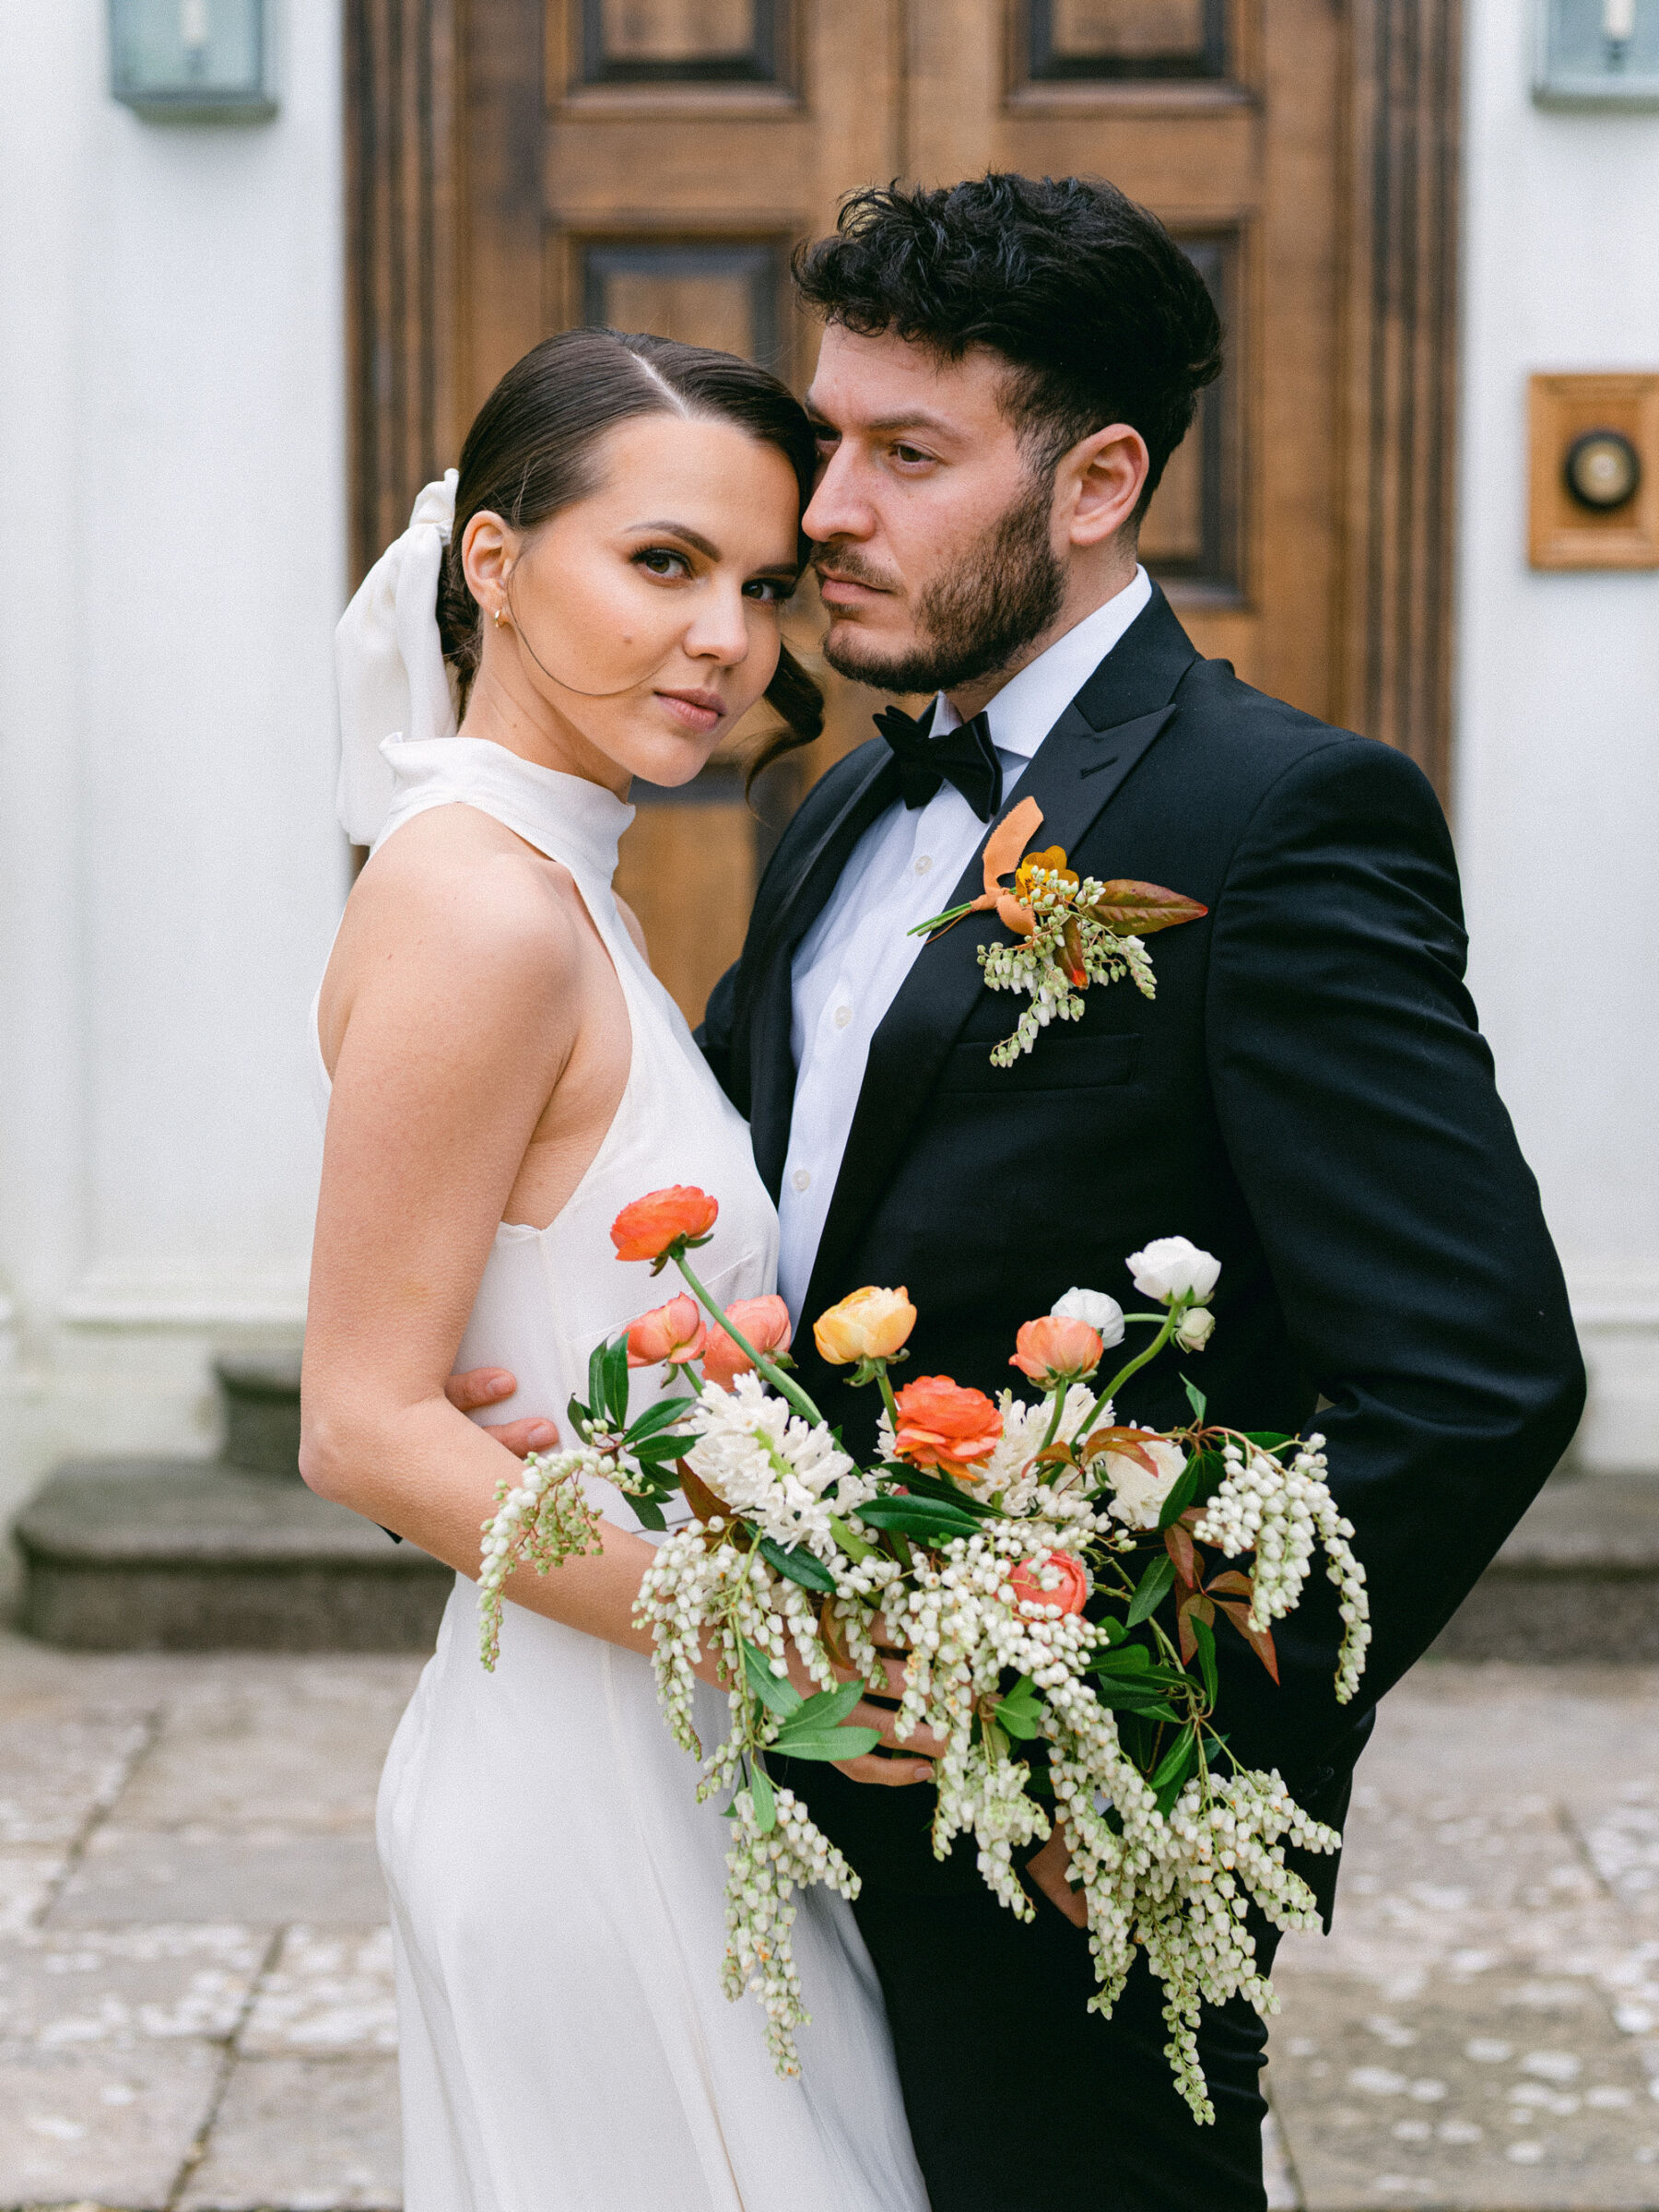 Bride in a halterneck wedding dress and carrying a colourful bouquet of British grown flowers.